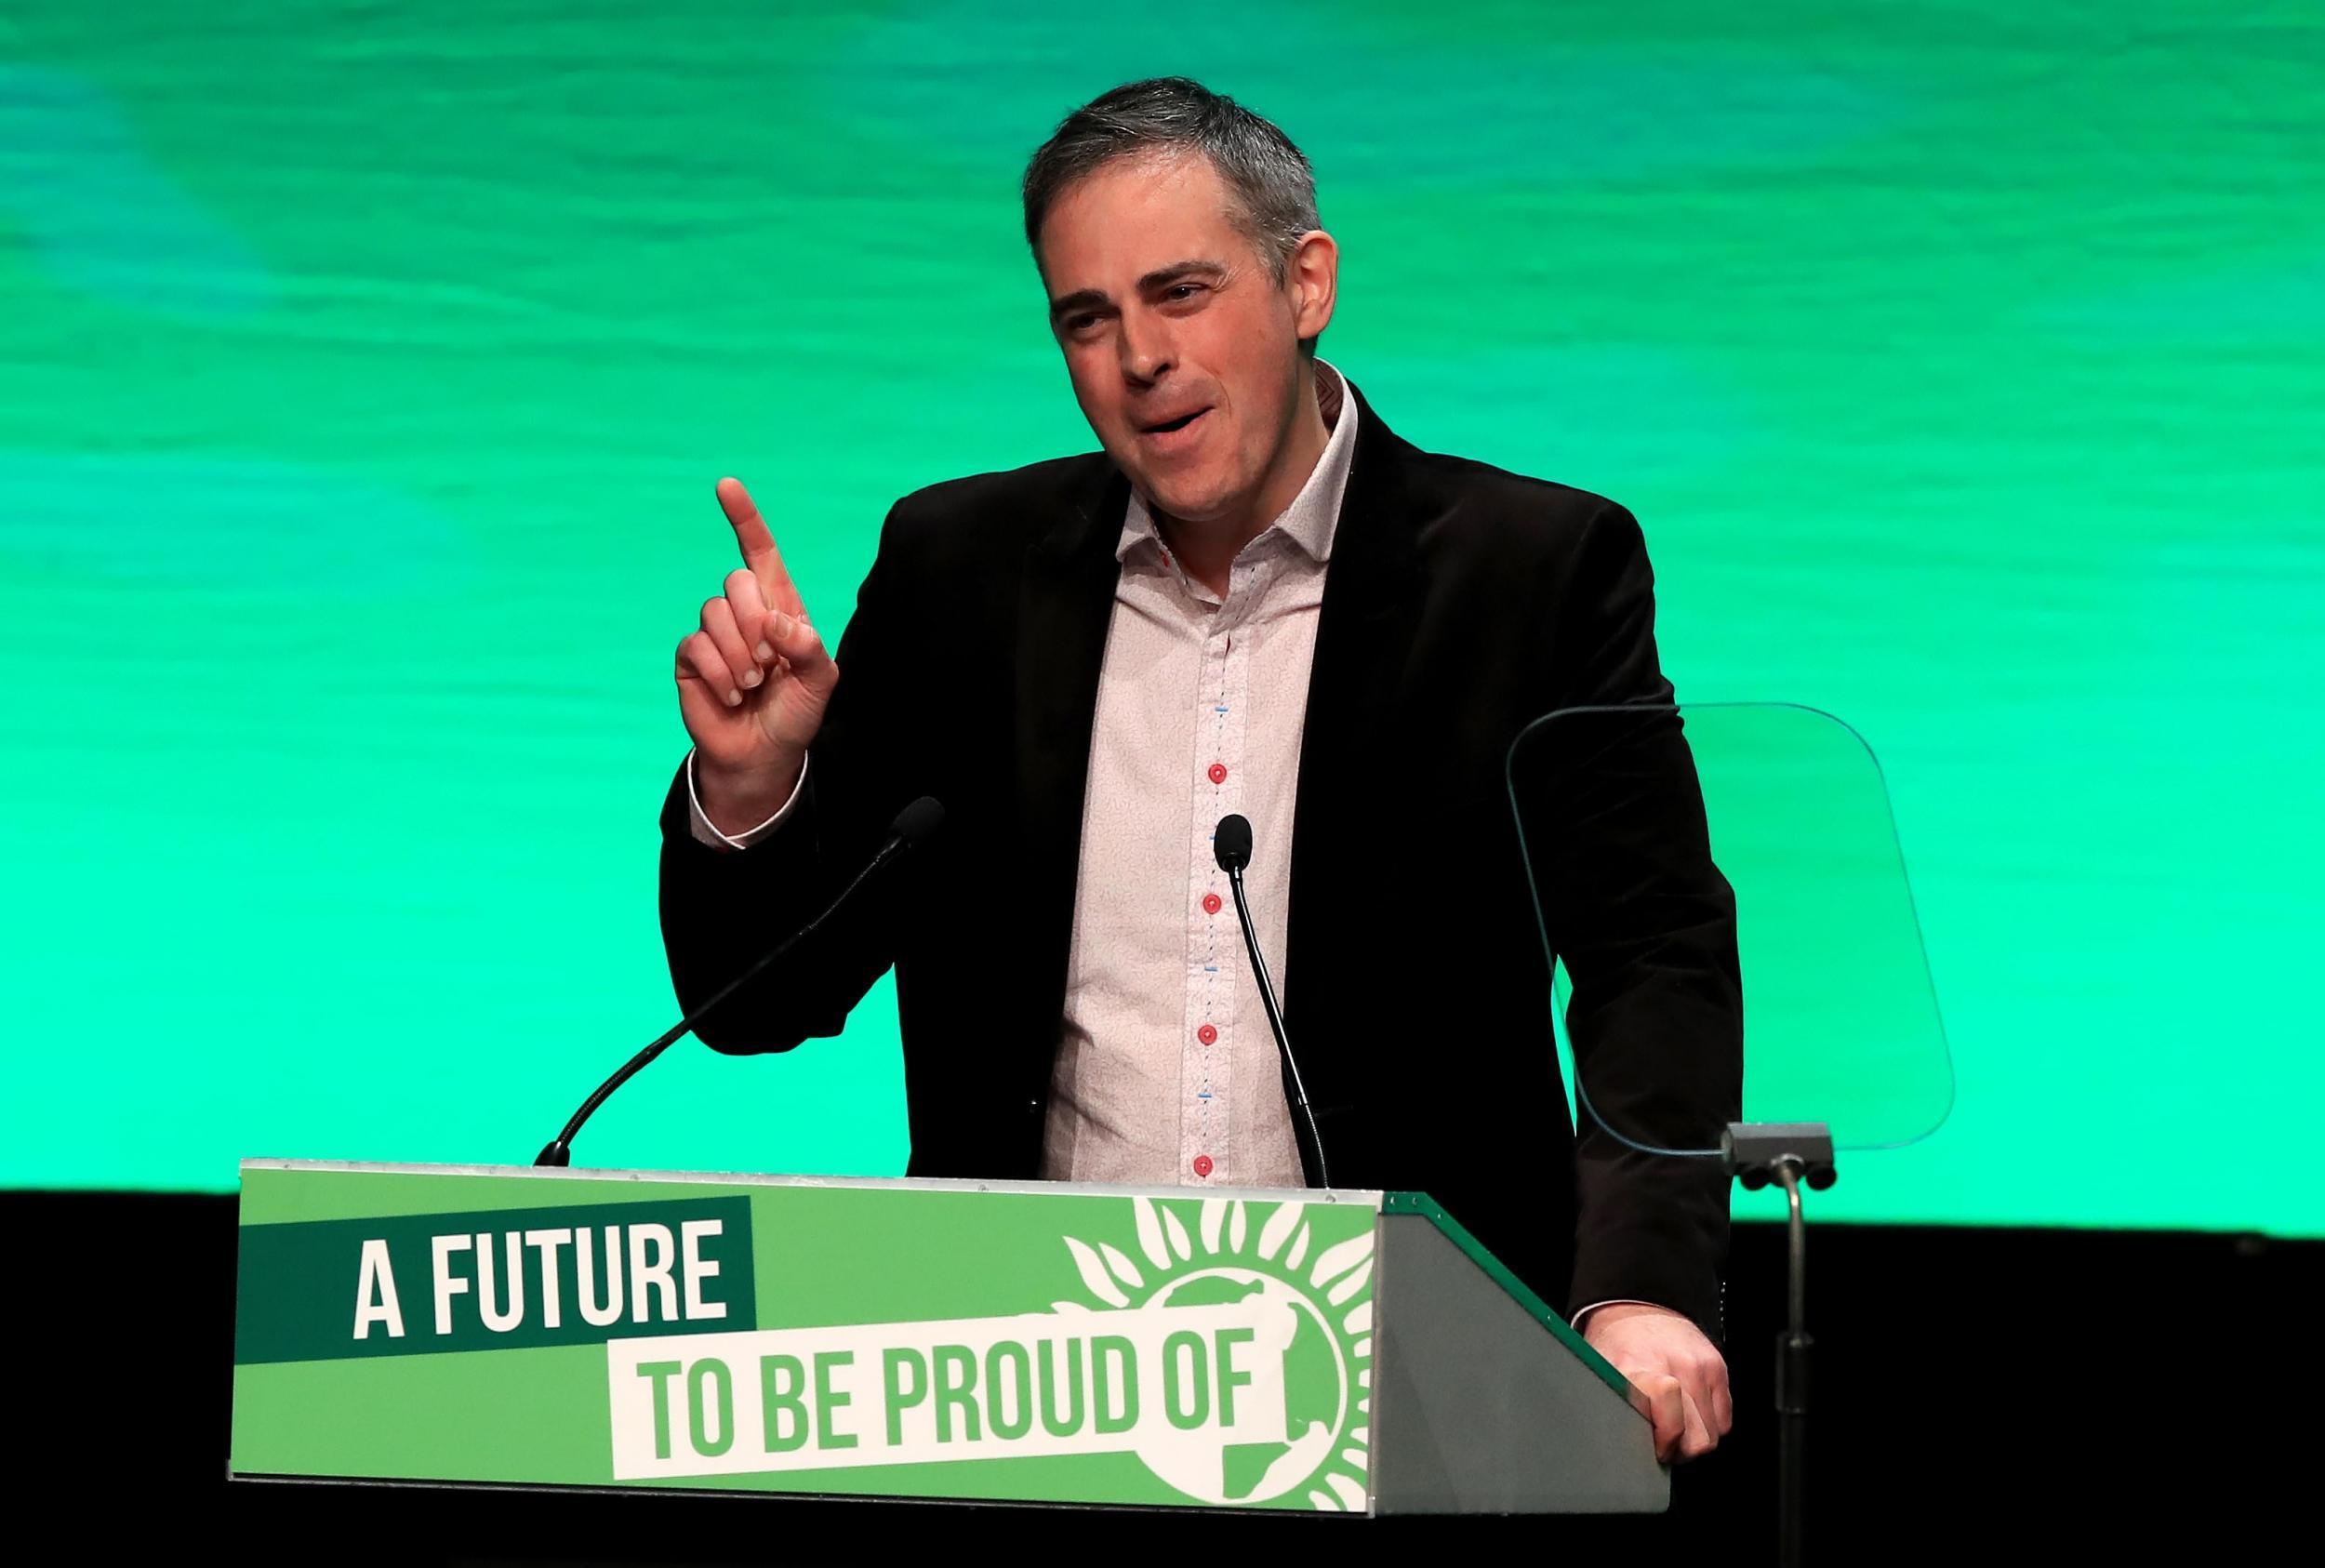 Green Party co-leader Jonathan Bartley has complained to the BBC about its 'disproportionate' coverage